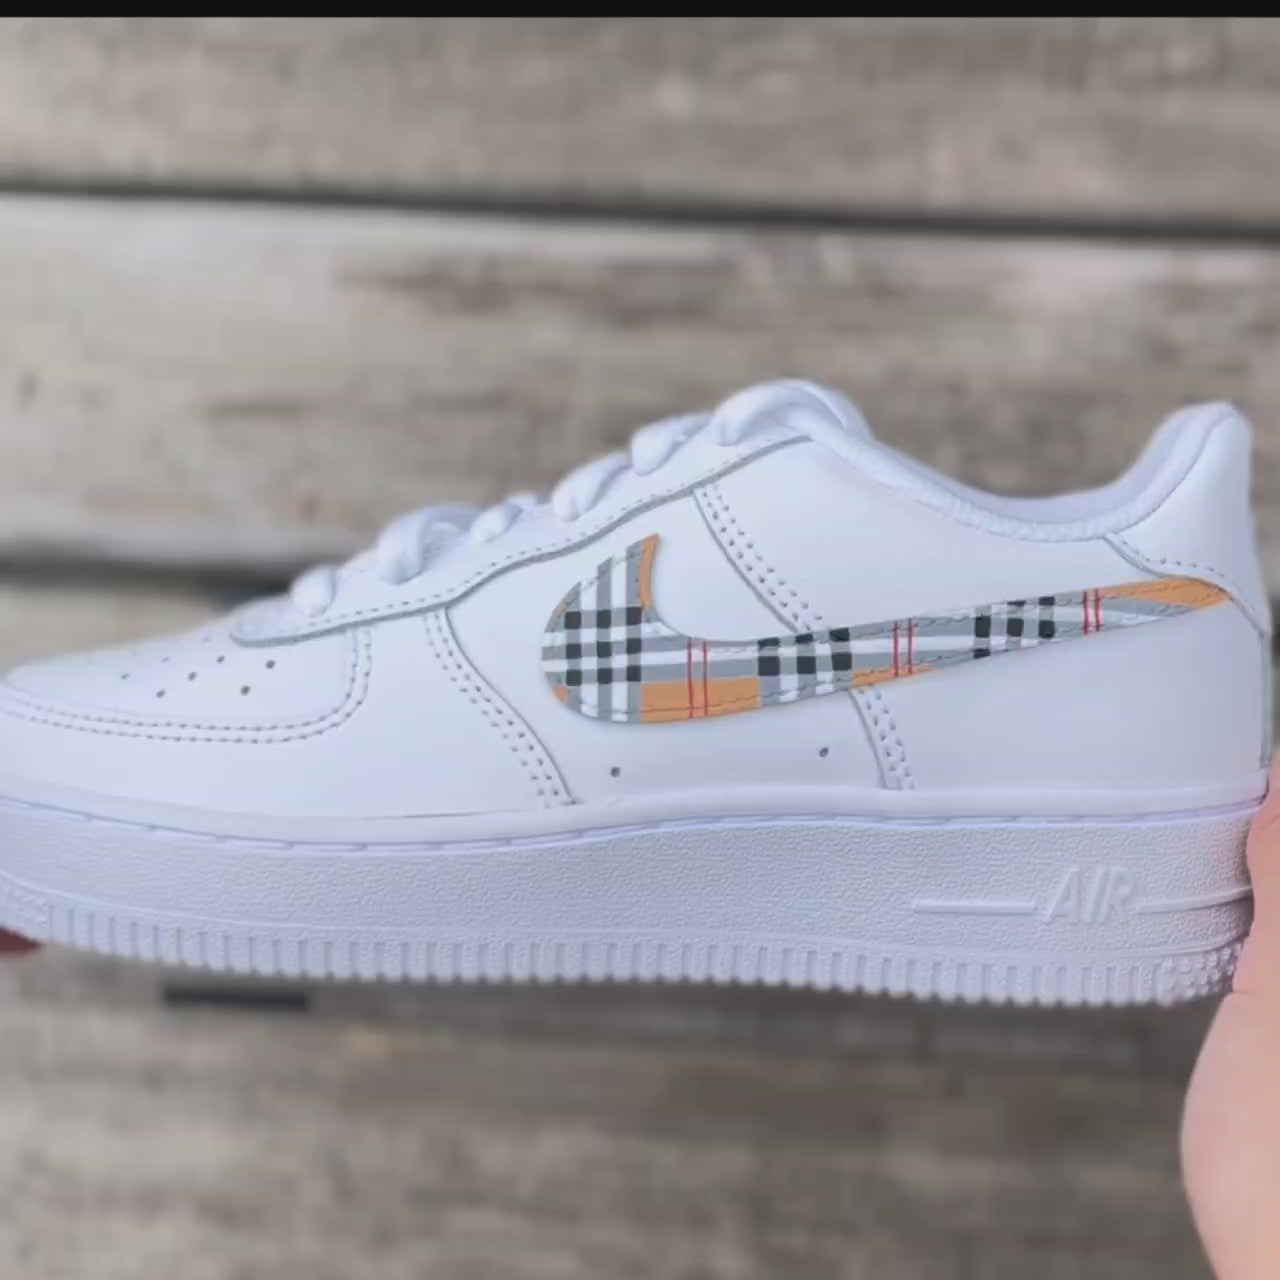 'Burberry' Air Force 1 Video